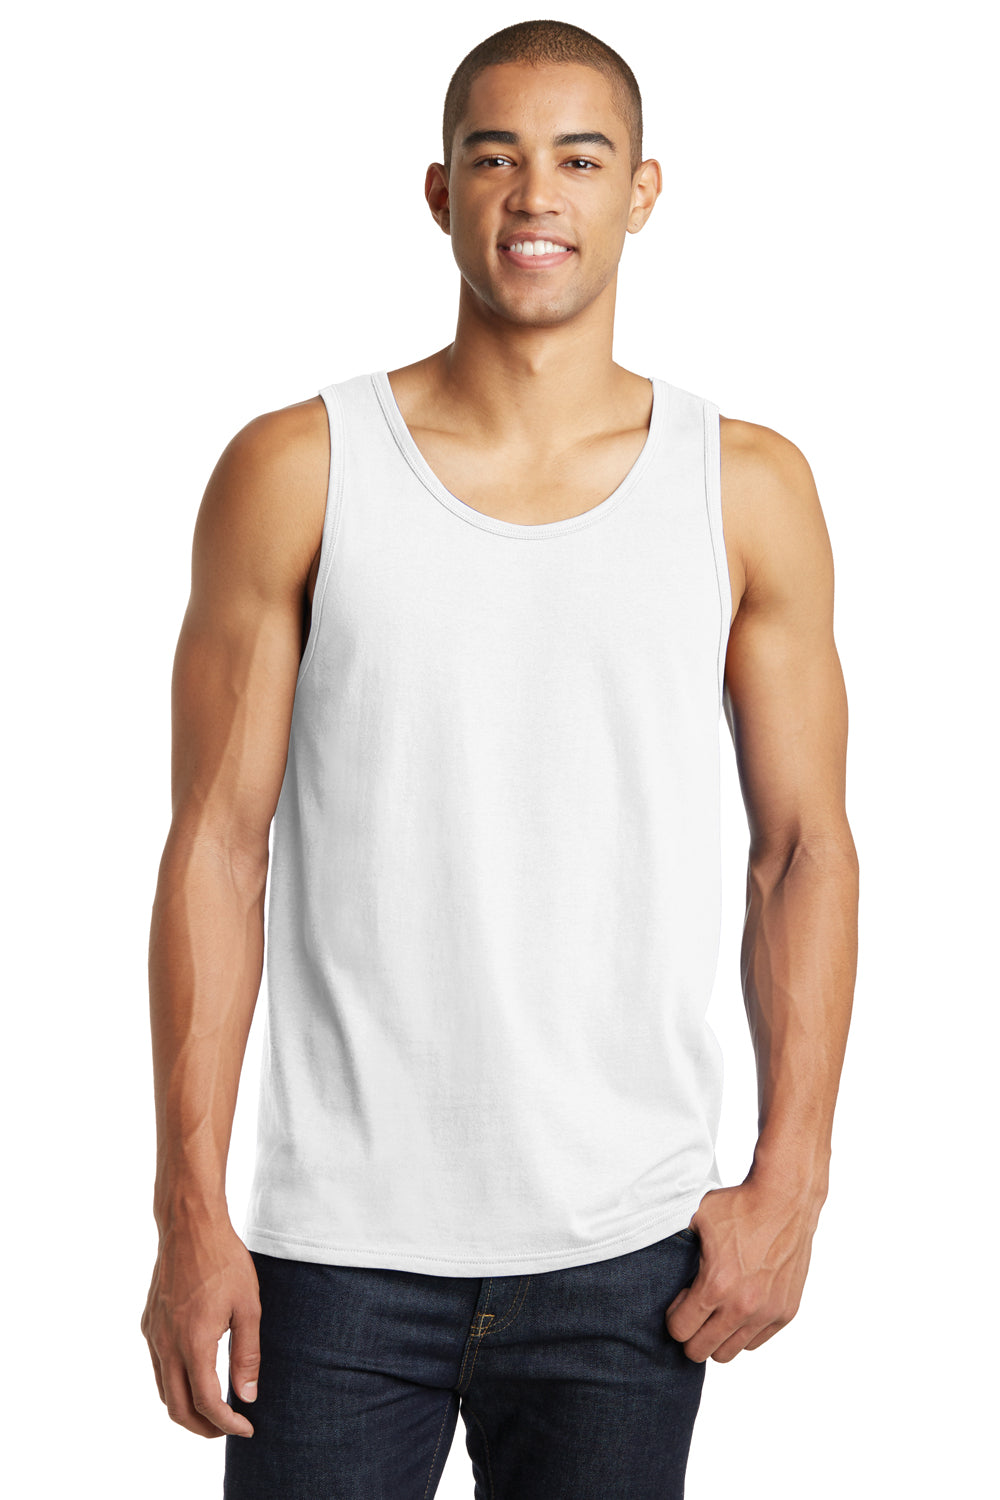 District DT5300 Mens The Concert Tank Top White Front